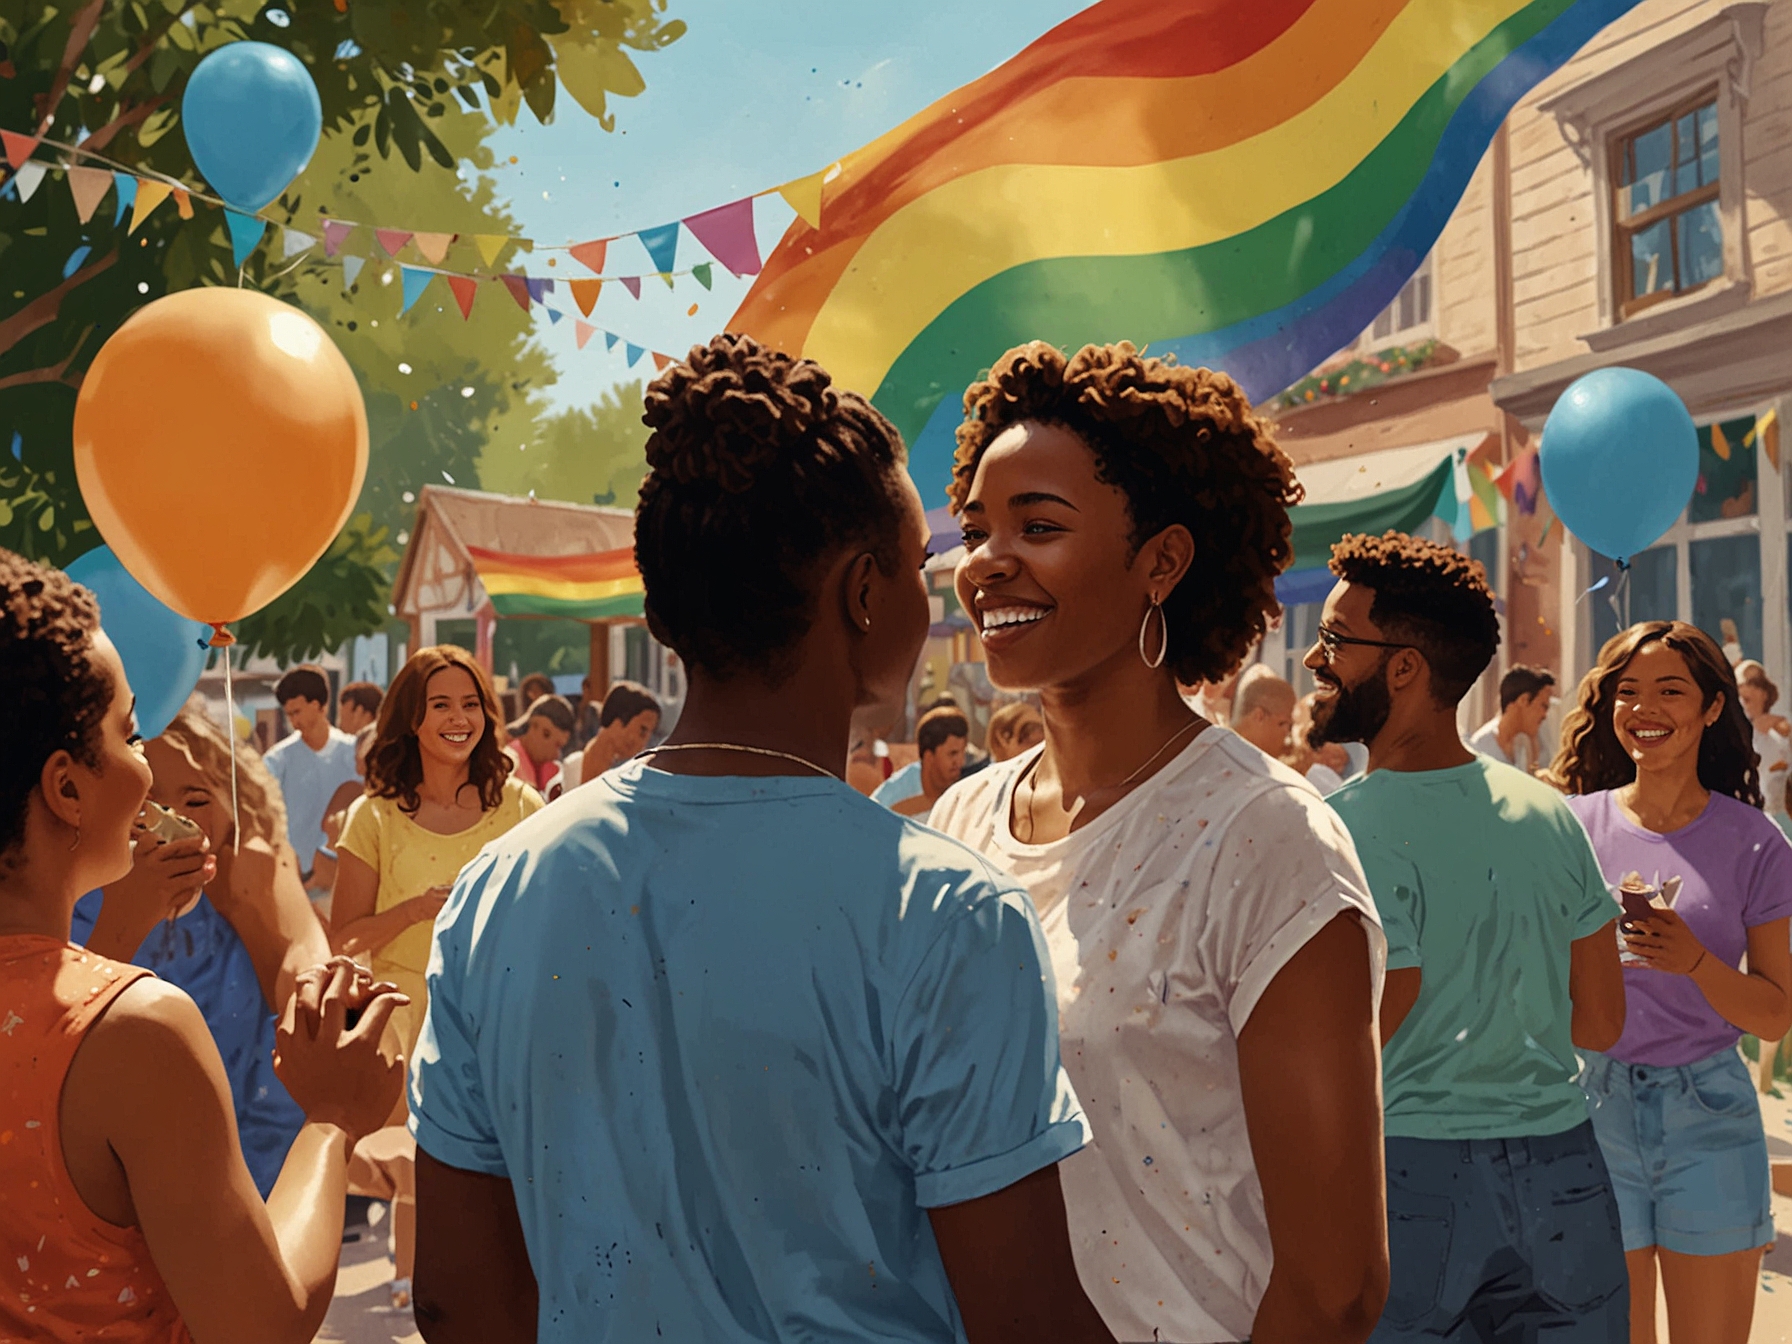 A community event with modest decorations, where families interact and children play, reflecting the scaled-back, more intimate celebrations that characterized this year's Pride Month.